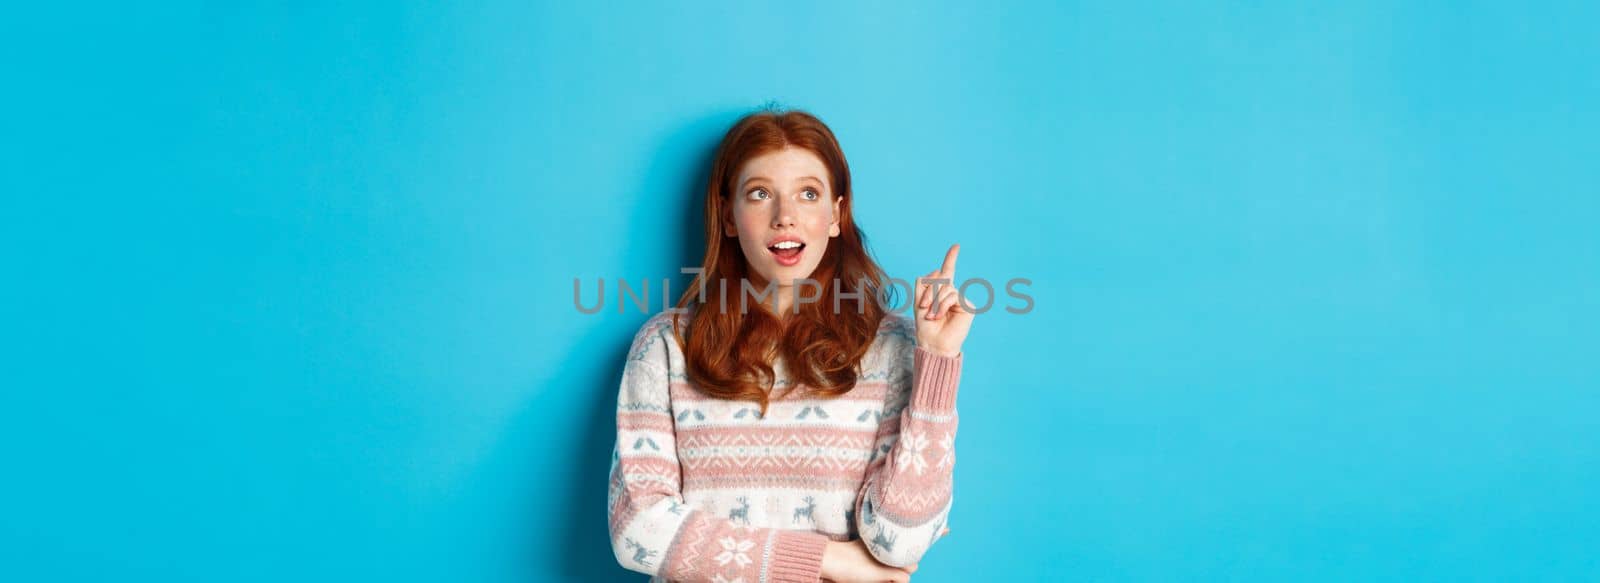 Thoughtful redhead girl in winter sweater having an idea, raising finger in eureka sign and looking up, standing against blue background.